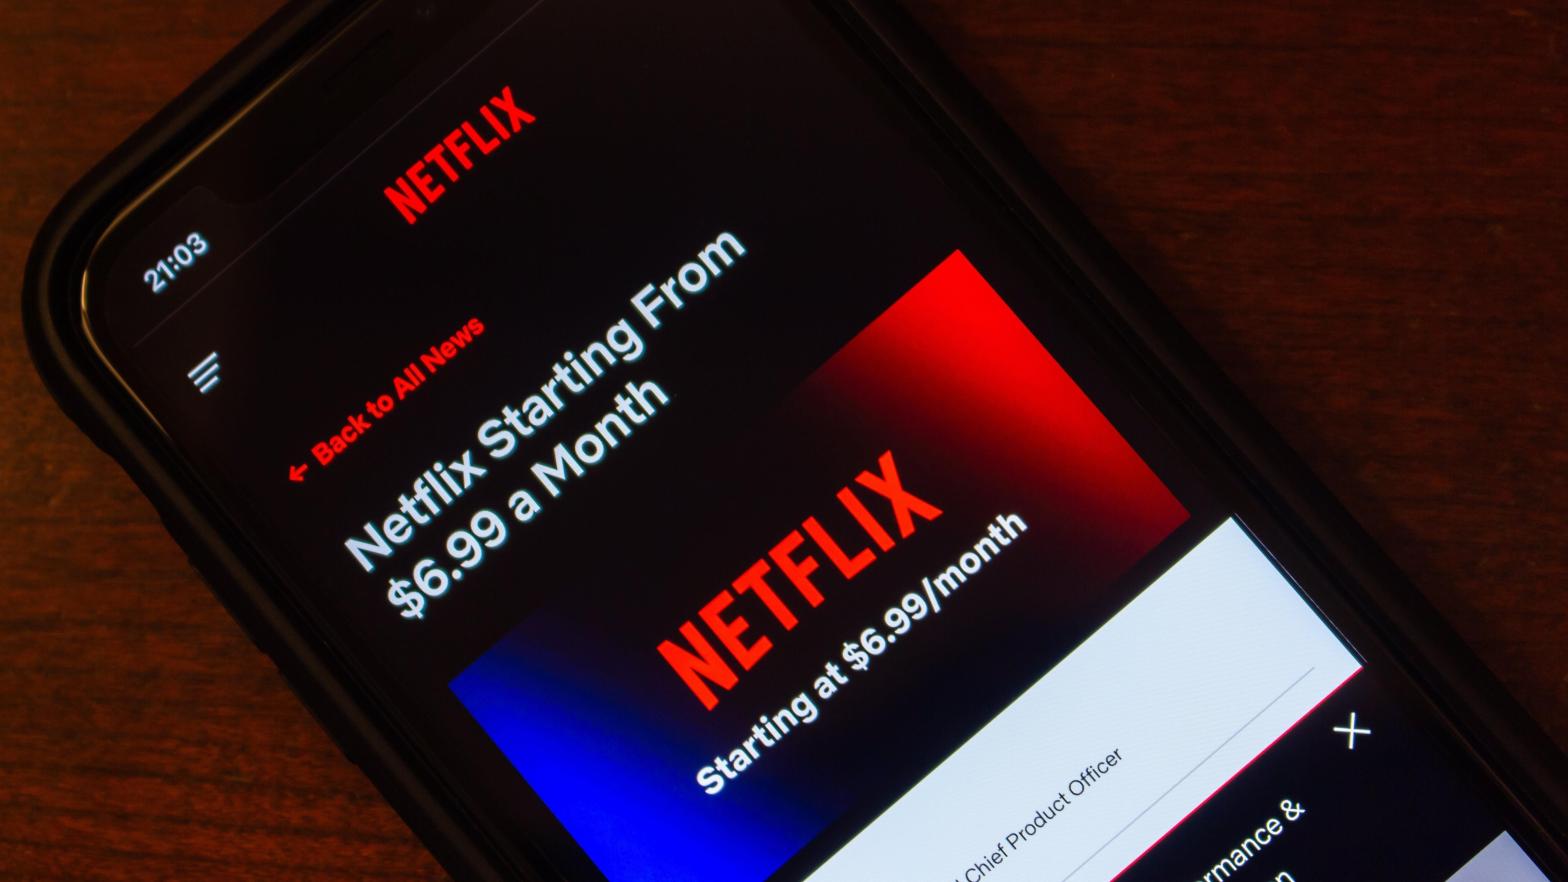 Netflix with Ads has become increasingly popular for new subscribers. Ending the regular 'Basic' plan would incentivise even more people onto an ad-based plan. (Photo: Koshiro K, Shutterstock)